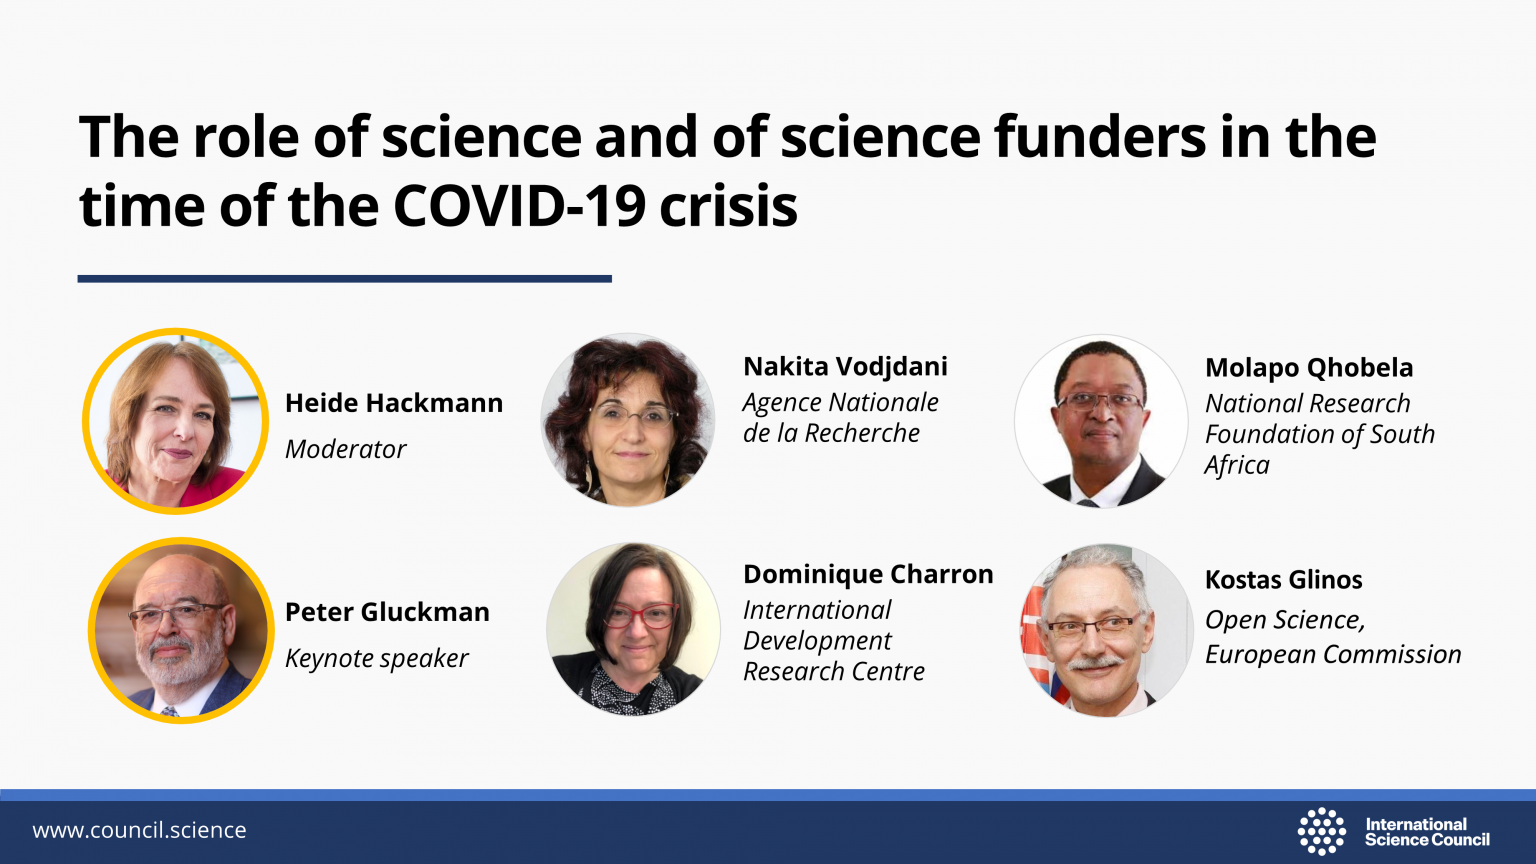 Webinar: The role of science and science funders in the time of the COVID-19 crisis